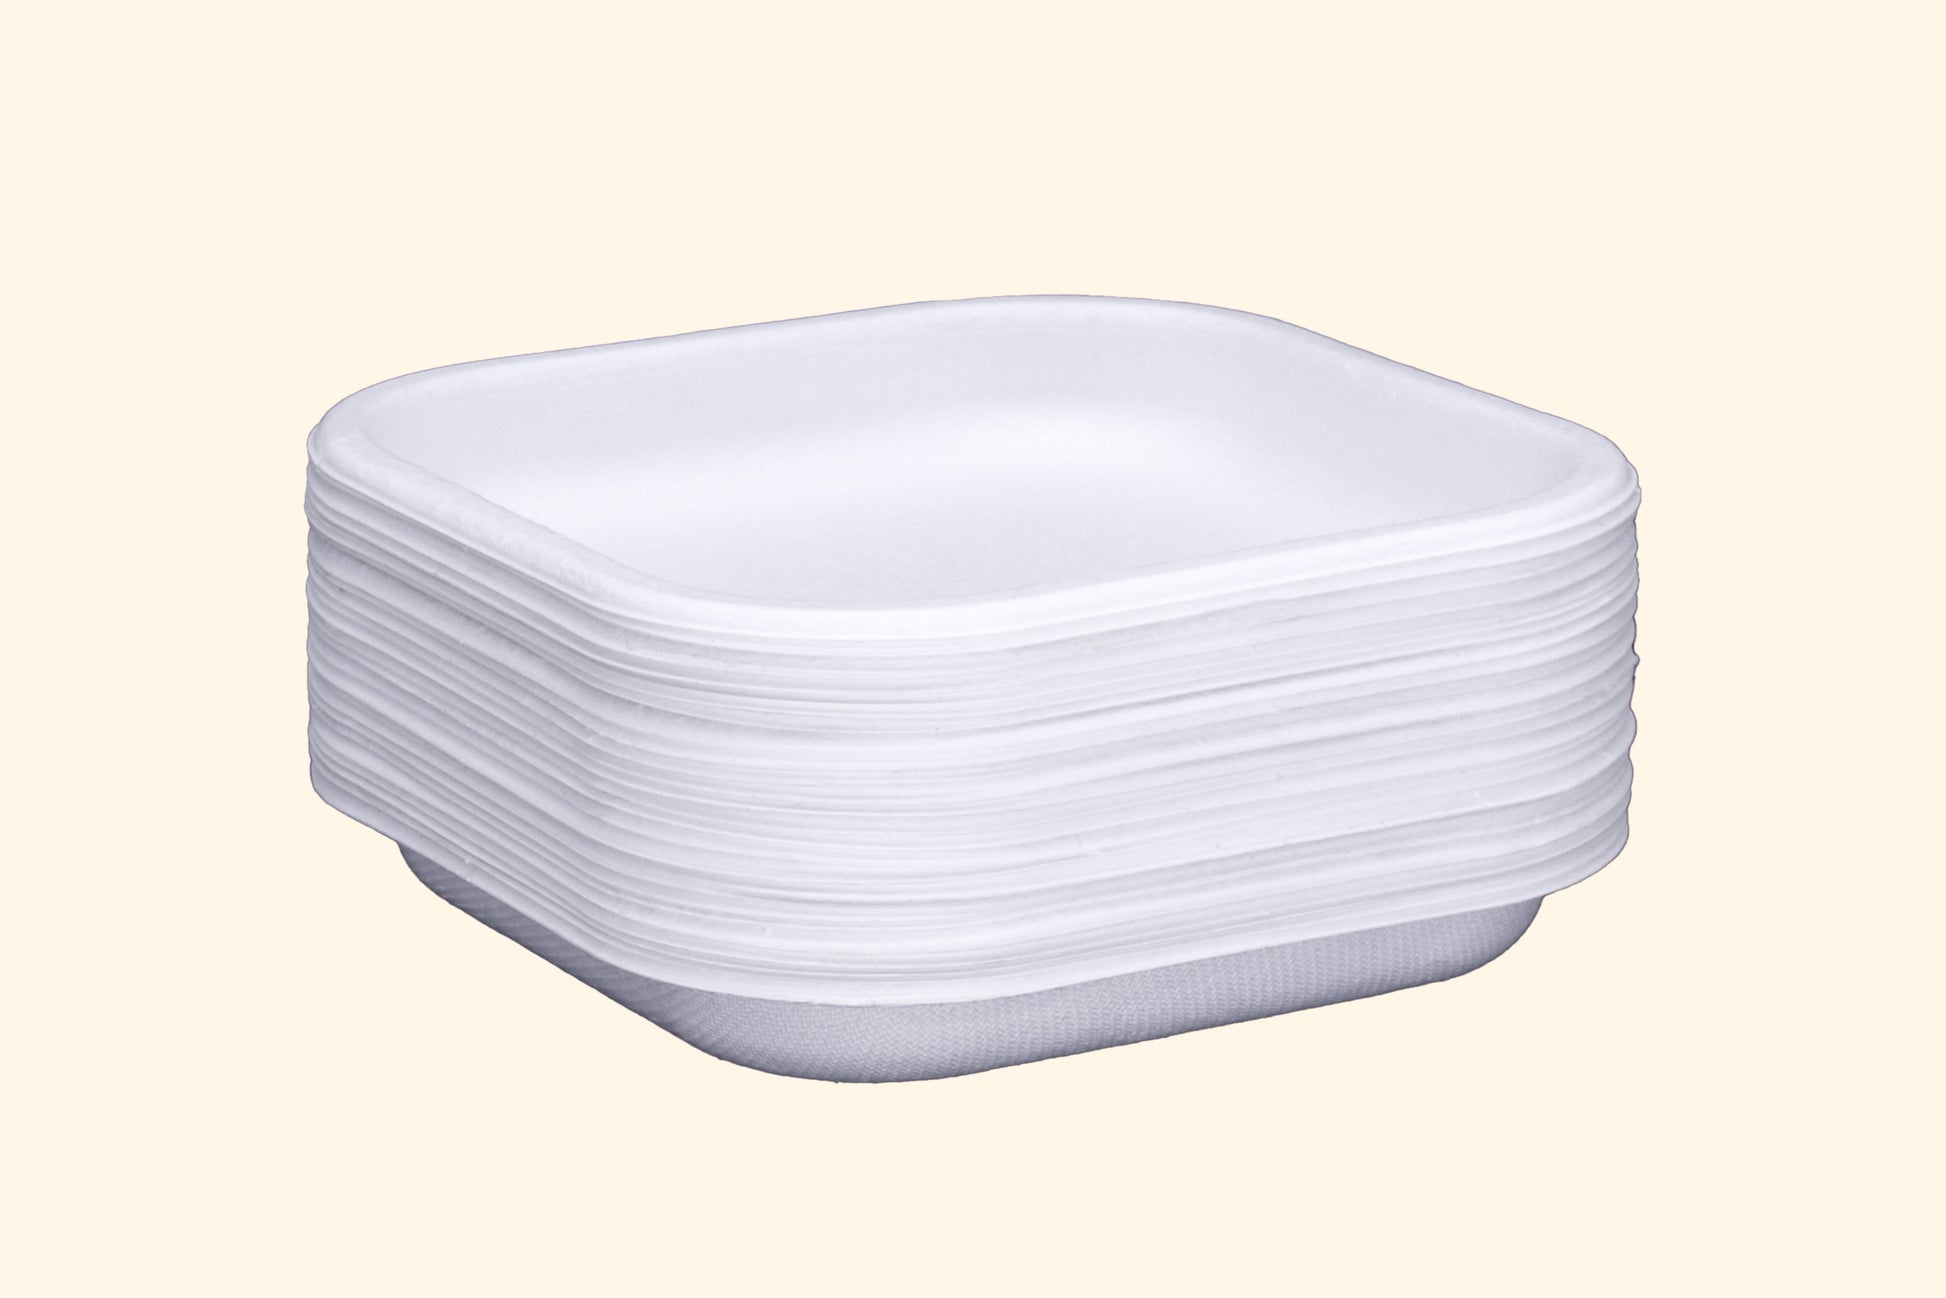 7-Inch-Square-Plates-Compostable-Sugarcane-Bagasse-Plate